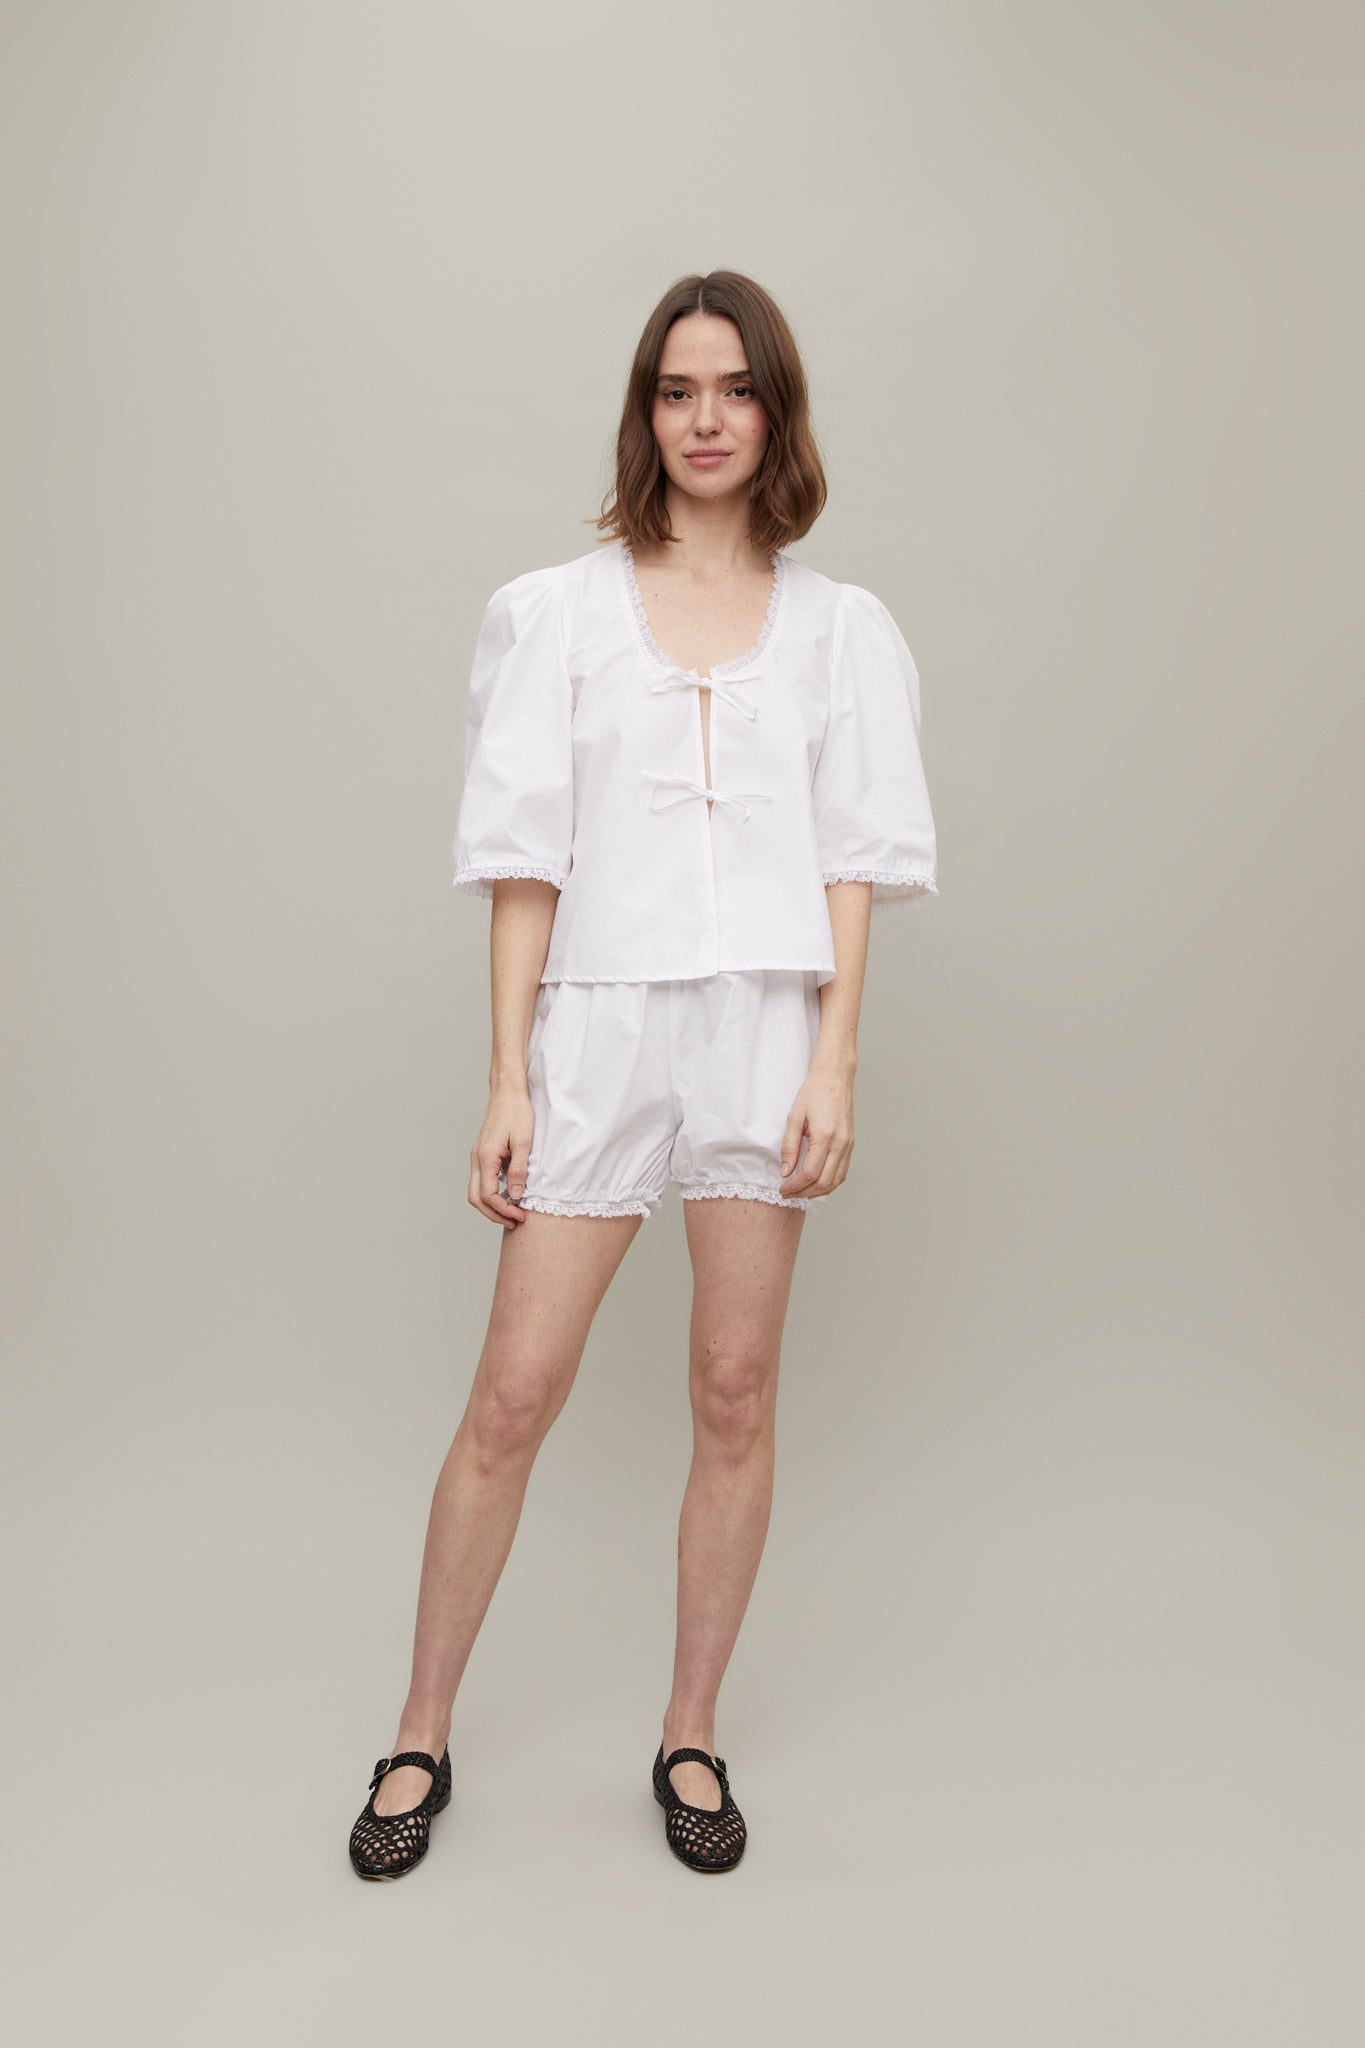 Agnes Ruffled Lace Blouse in White